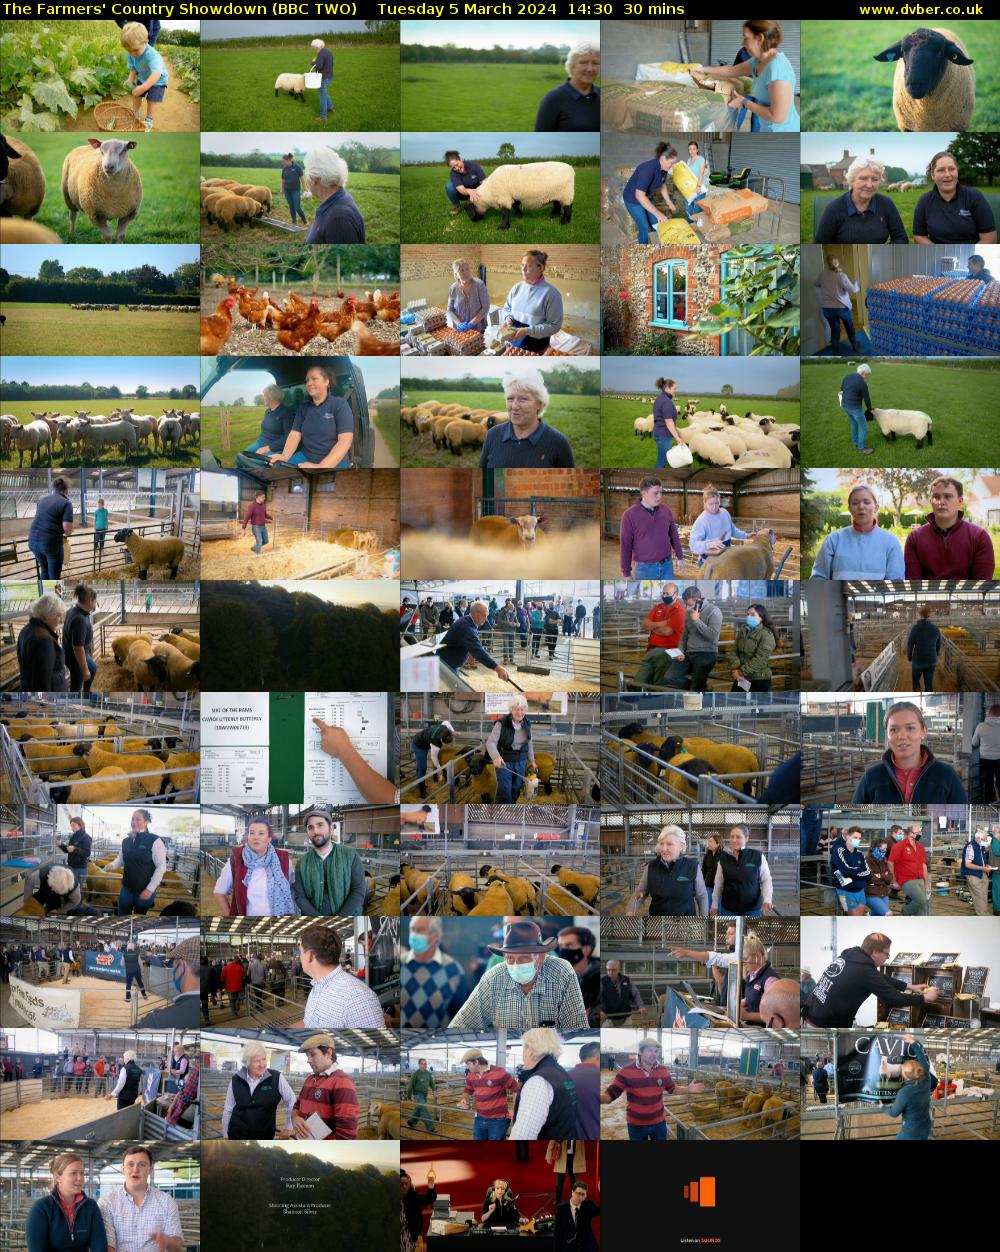 The Farmers' Country Showdown (BBC TWO) Tuesday 5 March 2024 14:30 - 15:00